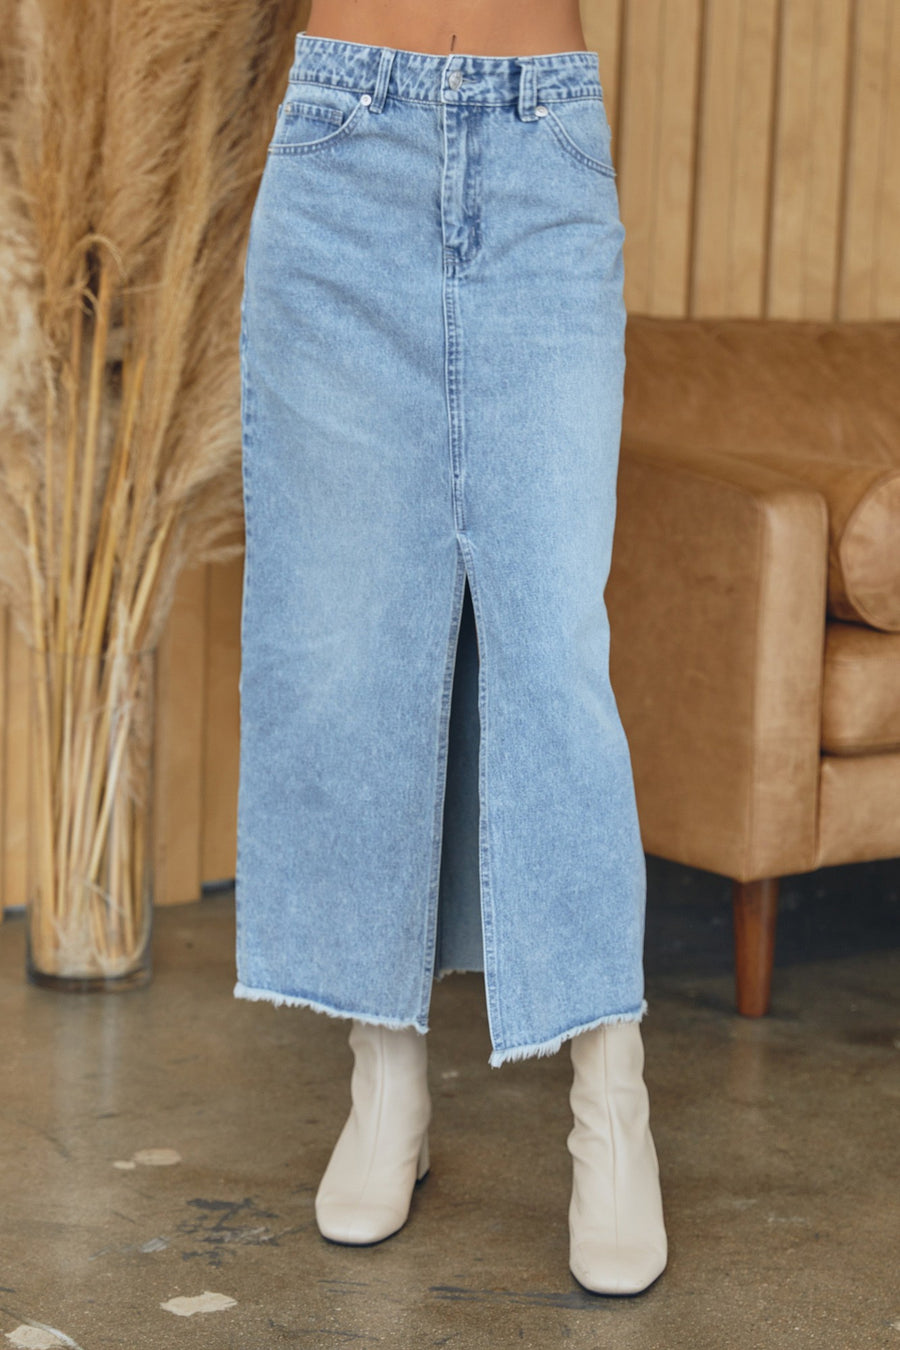 Featuring a light wash denim midi skirt with pockets and a front slit detail in the color light denim